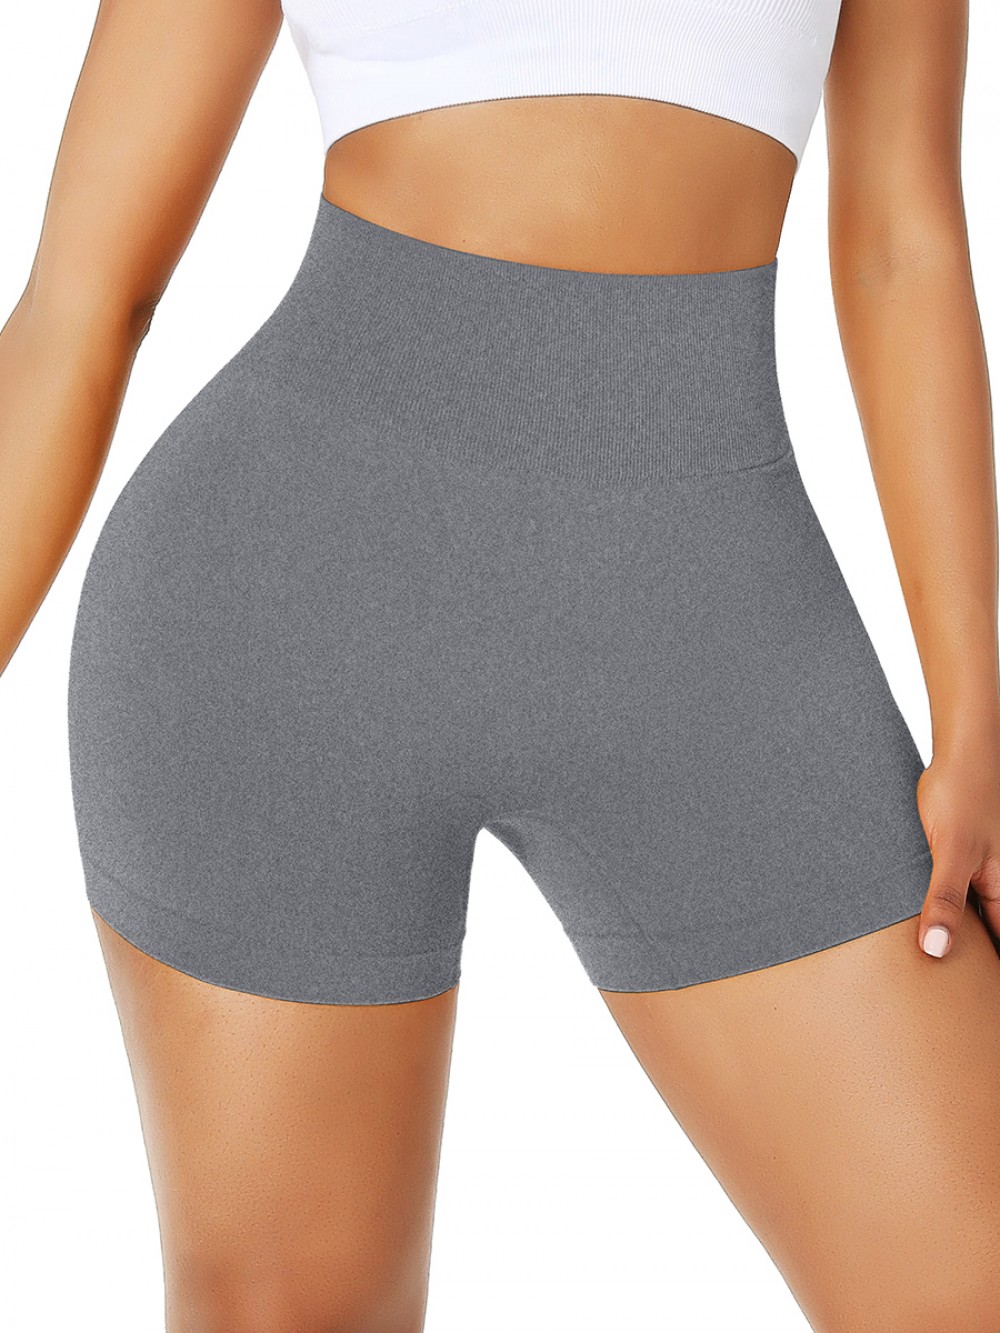 Energetic Gray Wide Waistband Seamless Running Shorts Refined Outfit